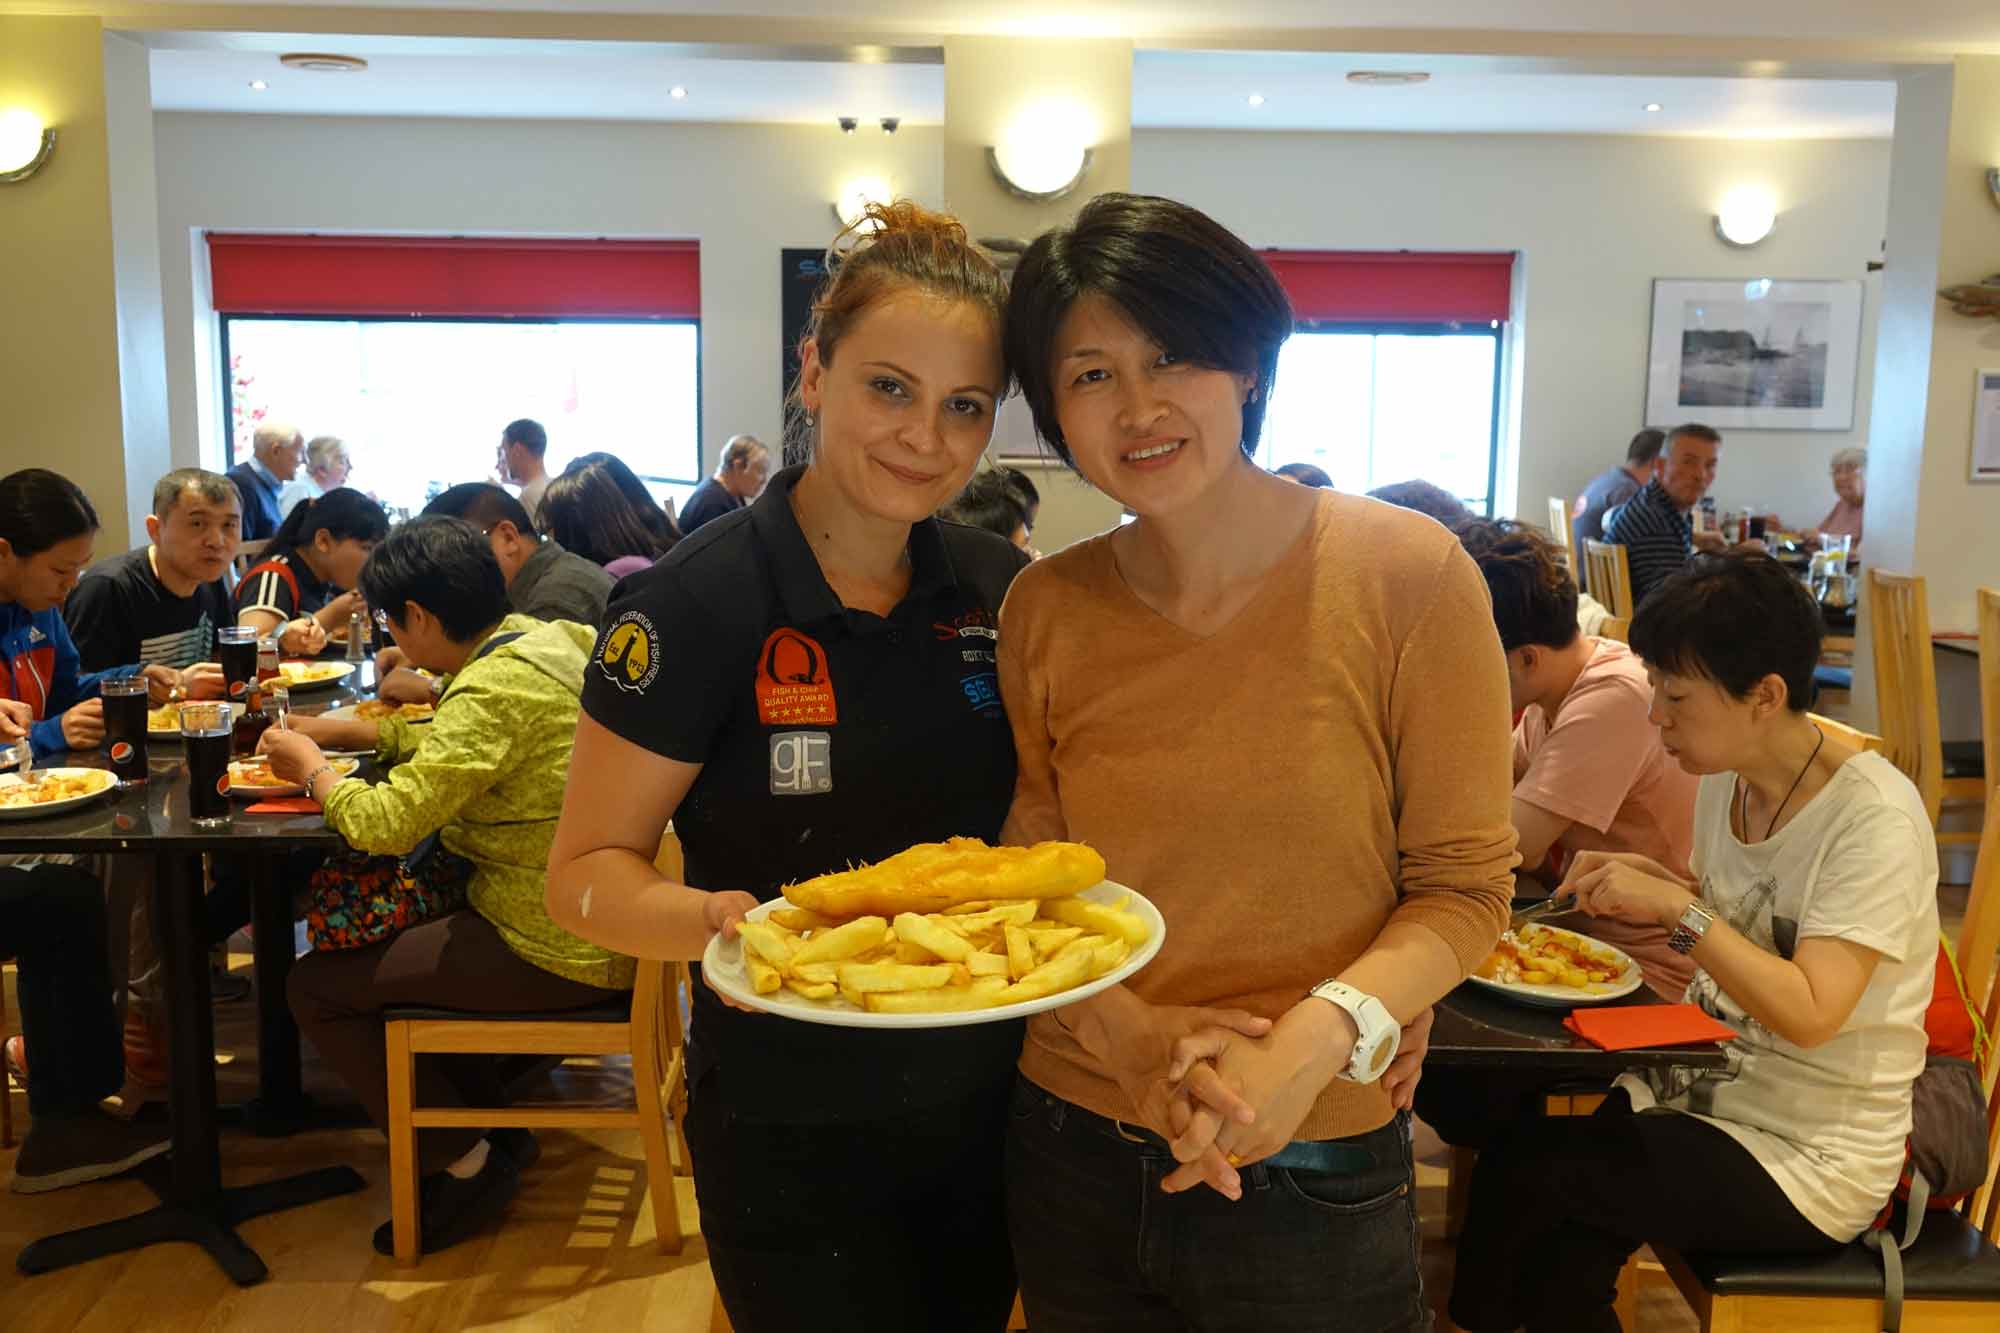 Caption: Fish and chips times 21! Scotts Fish and Chips manager Roxana Vasai (right) and Chinese tour group leader, Linda Lin in front of her tour group